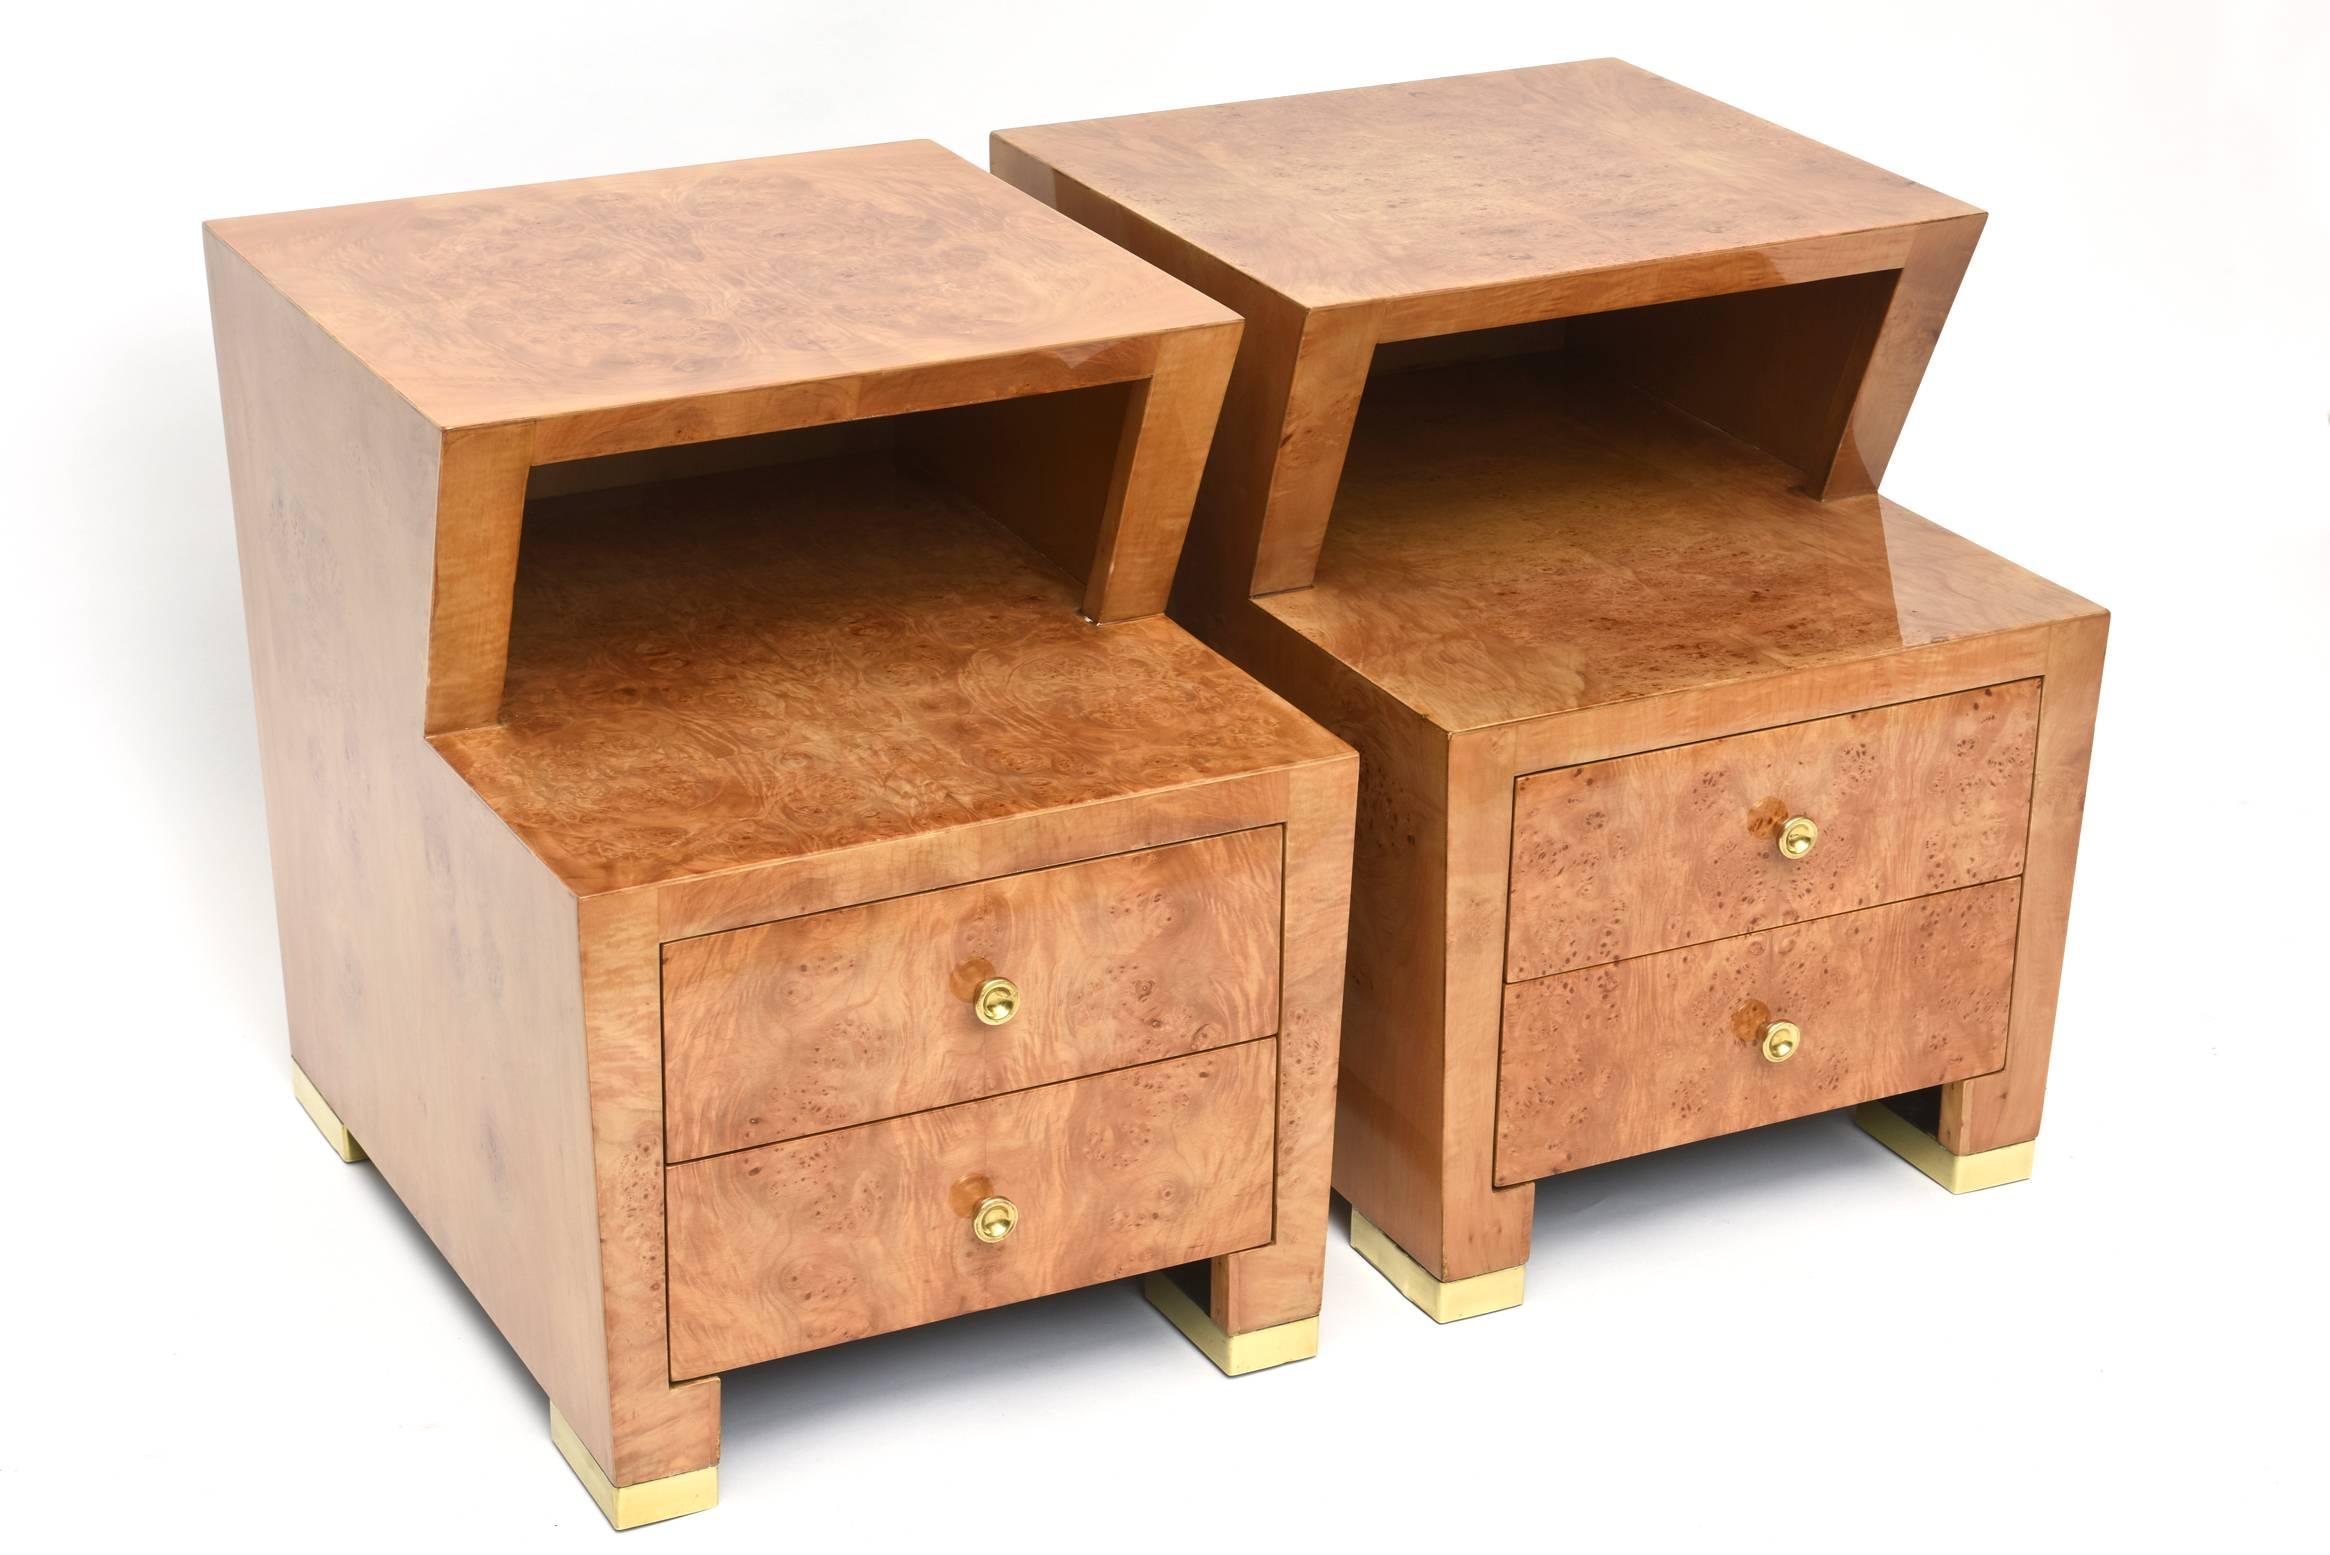 The square top above a canted cut-out above two drawers on brass feet.